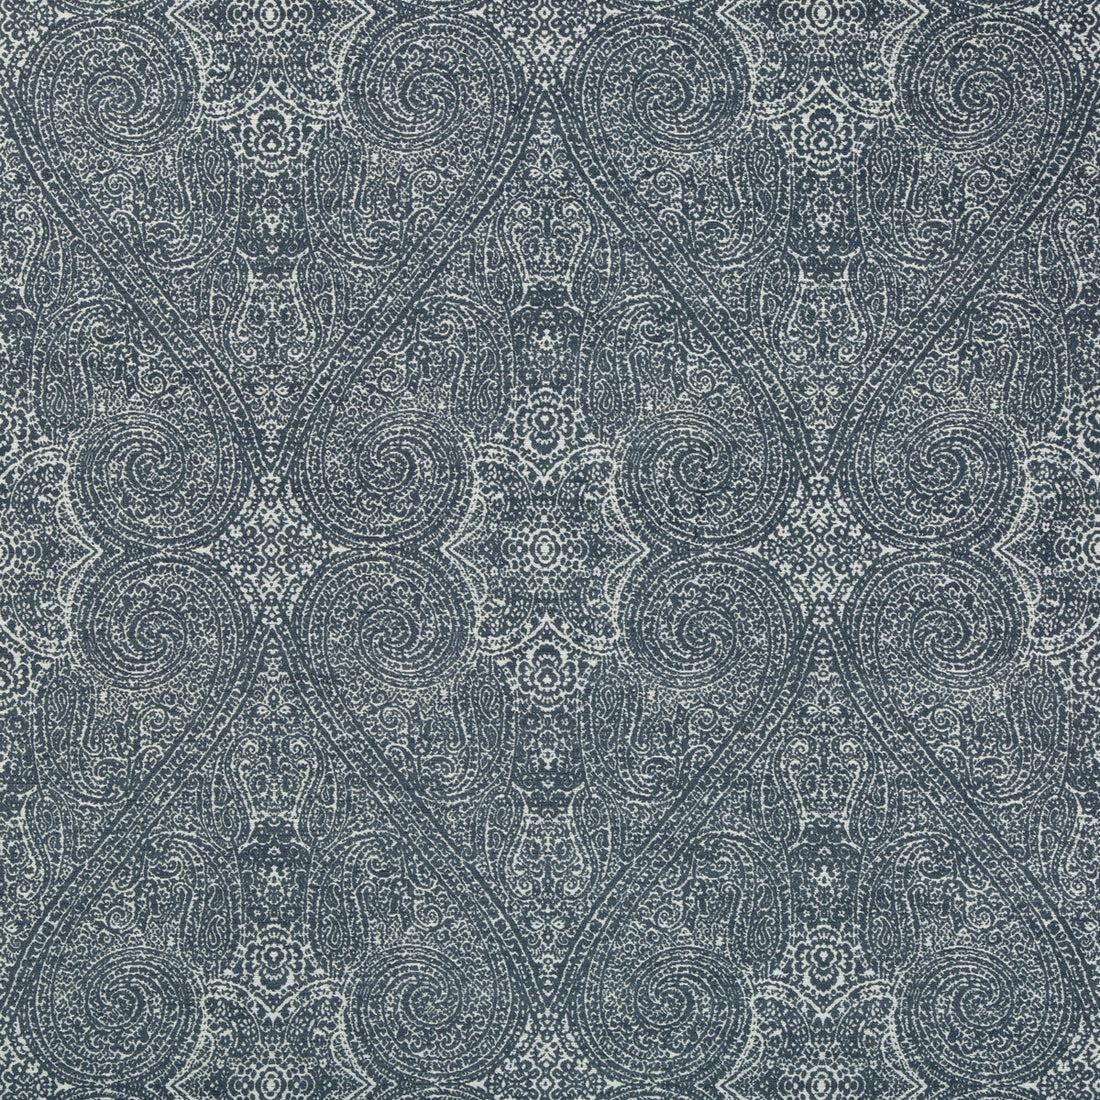 Kravet Design fabric in 35126-5 color - pattern 35126.5.0 - by Kravet Design in the Performance Crypton Home collection